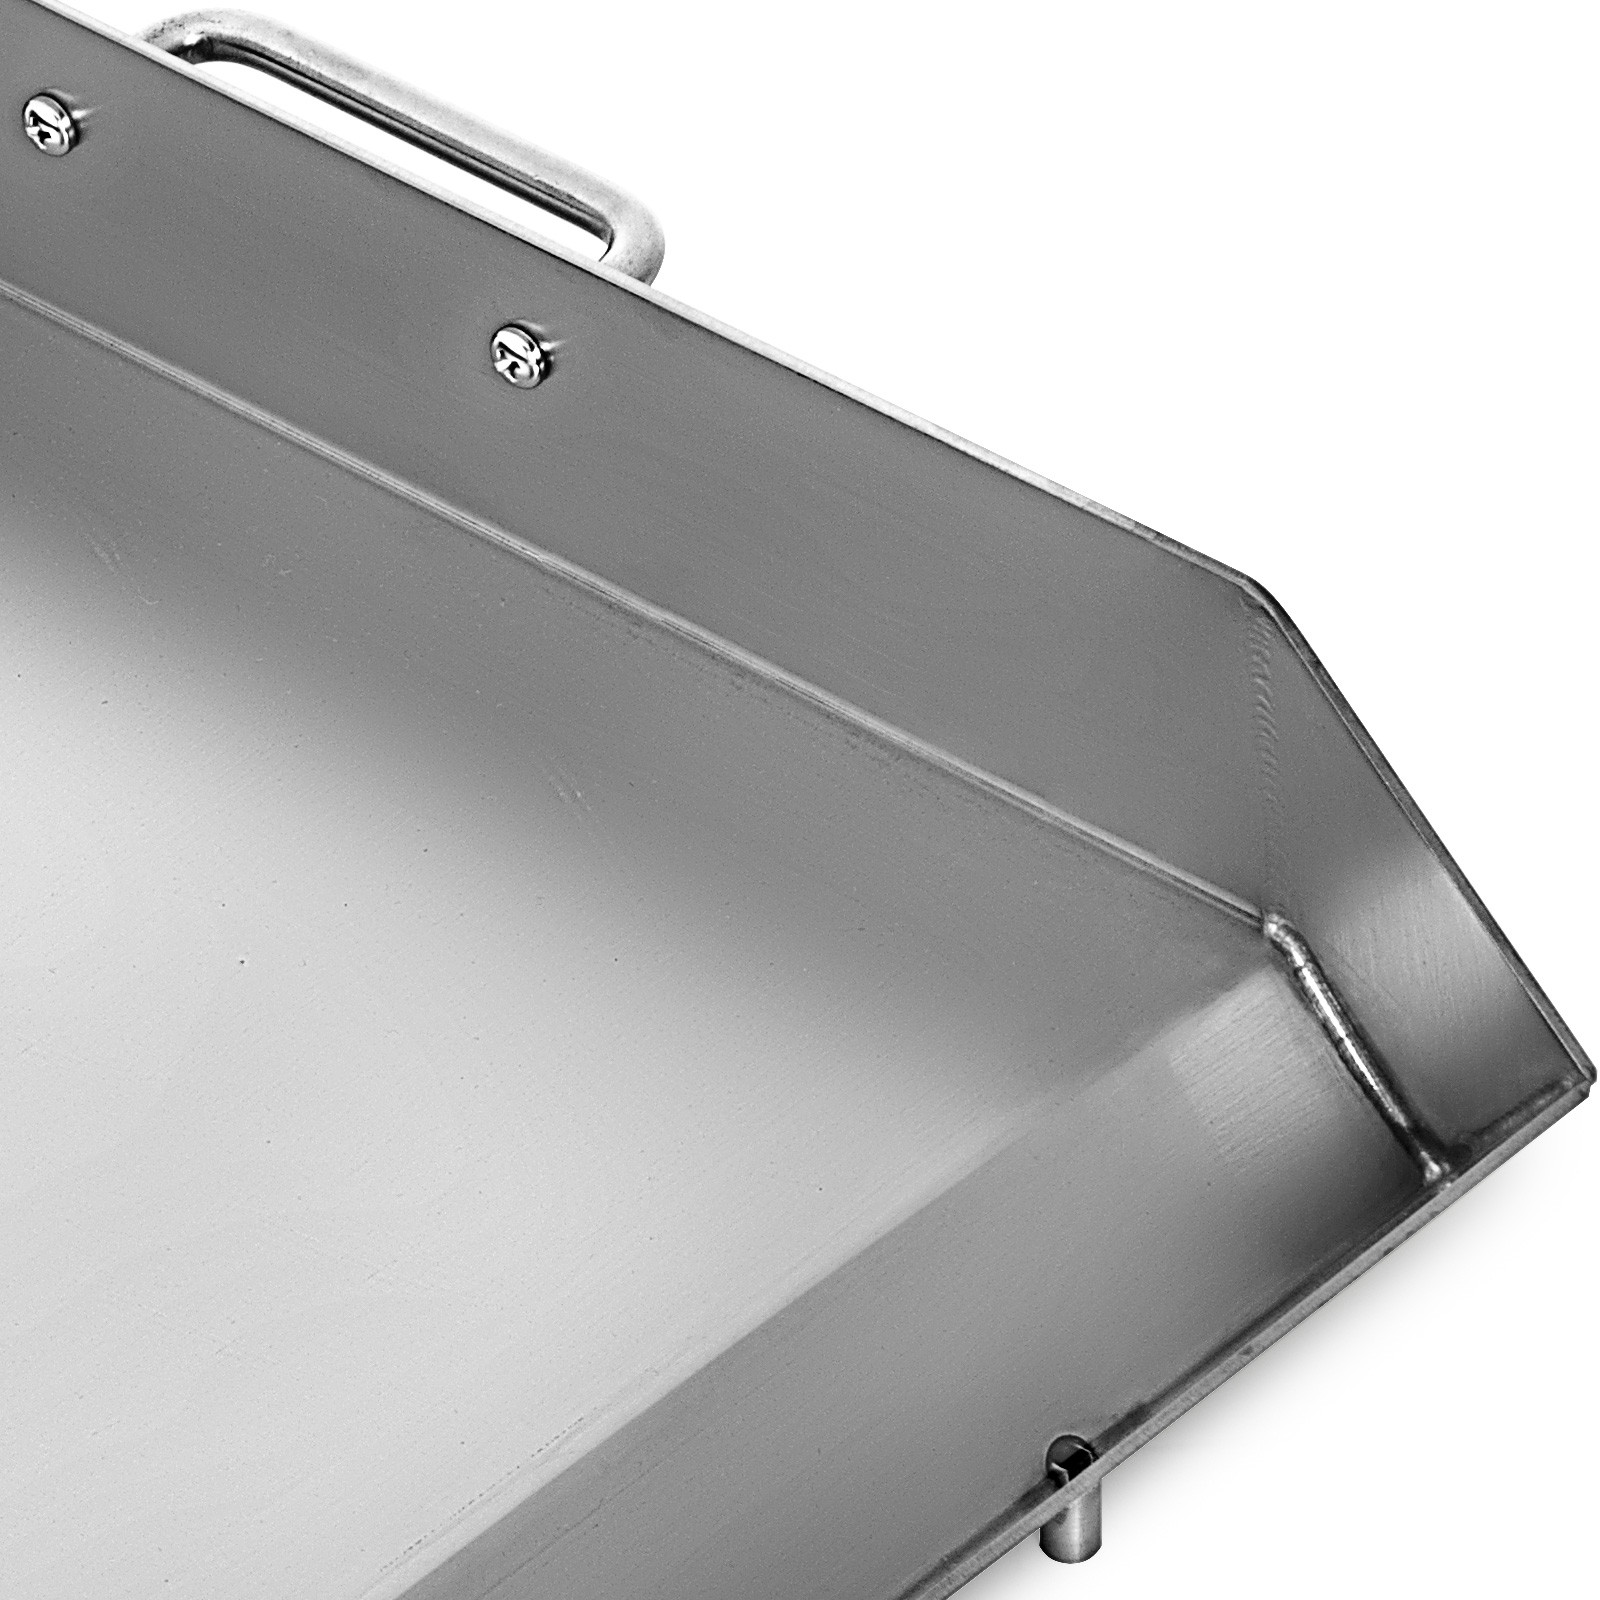 stainless steel griddle for grill